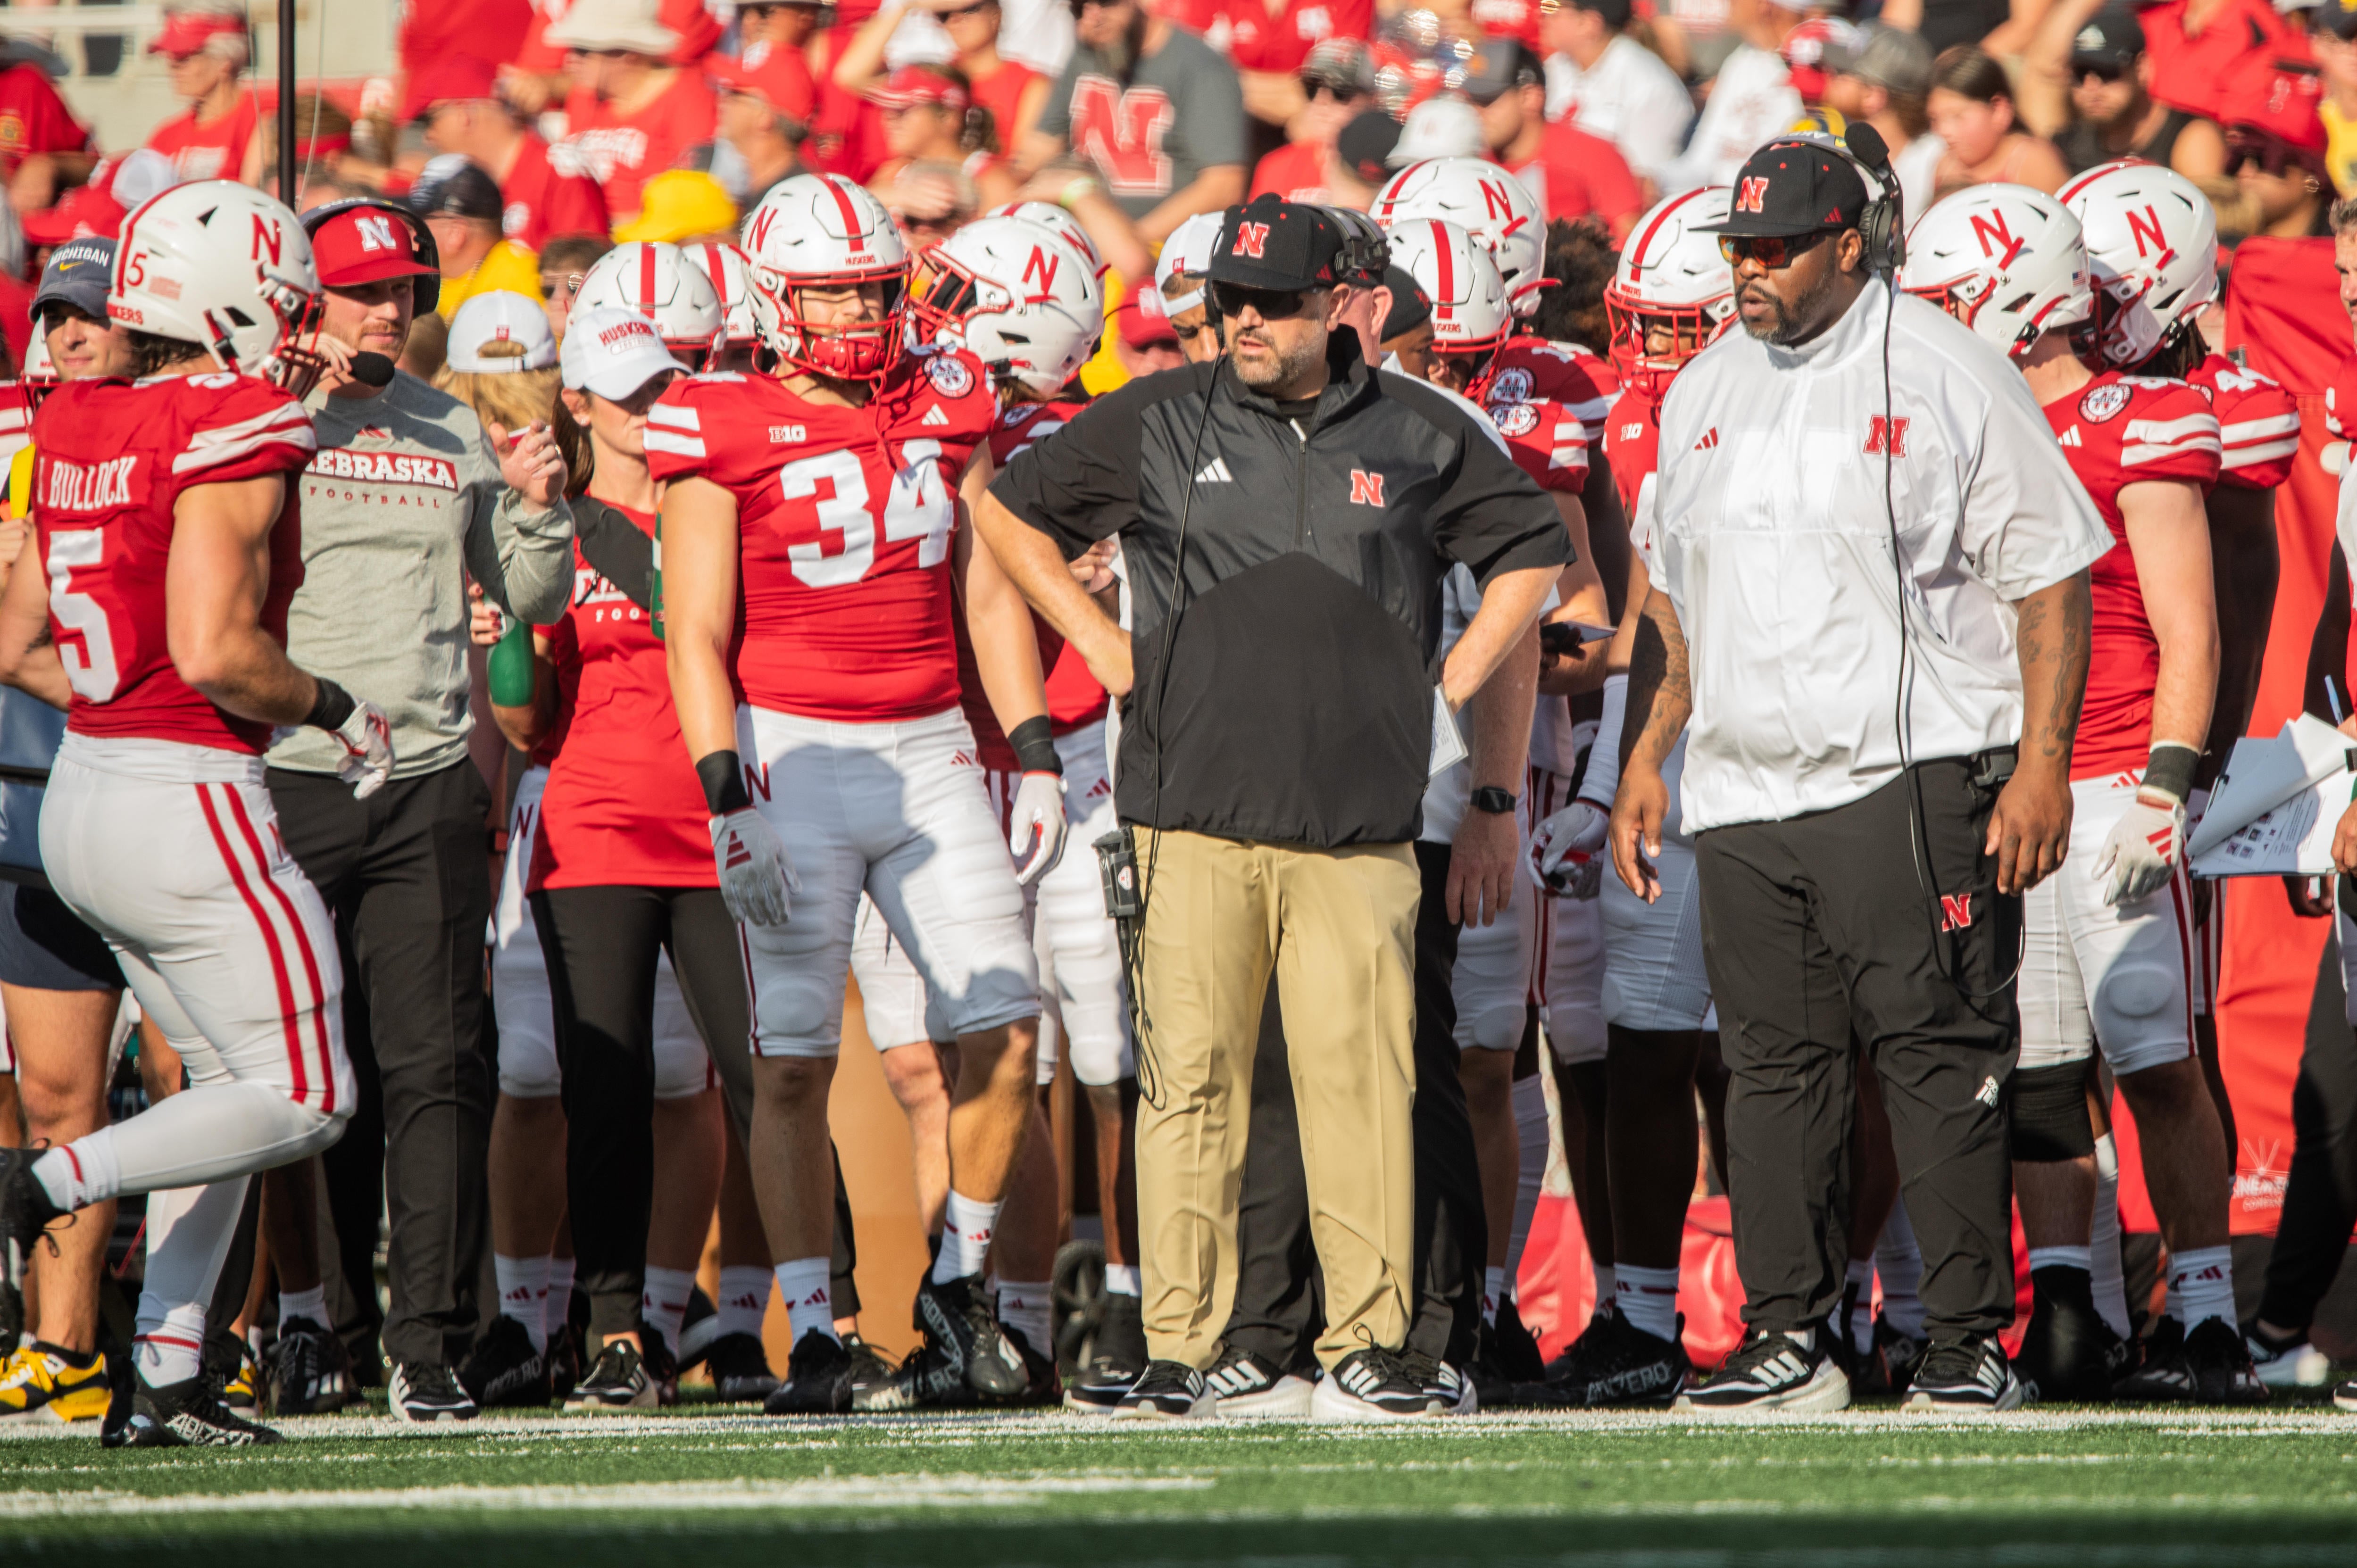 Matt Rhule wants to see different mentality from Husker team 